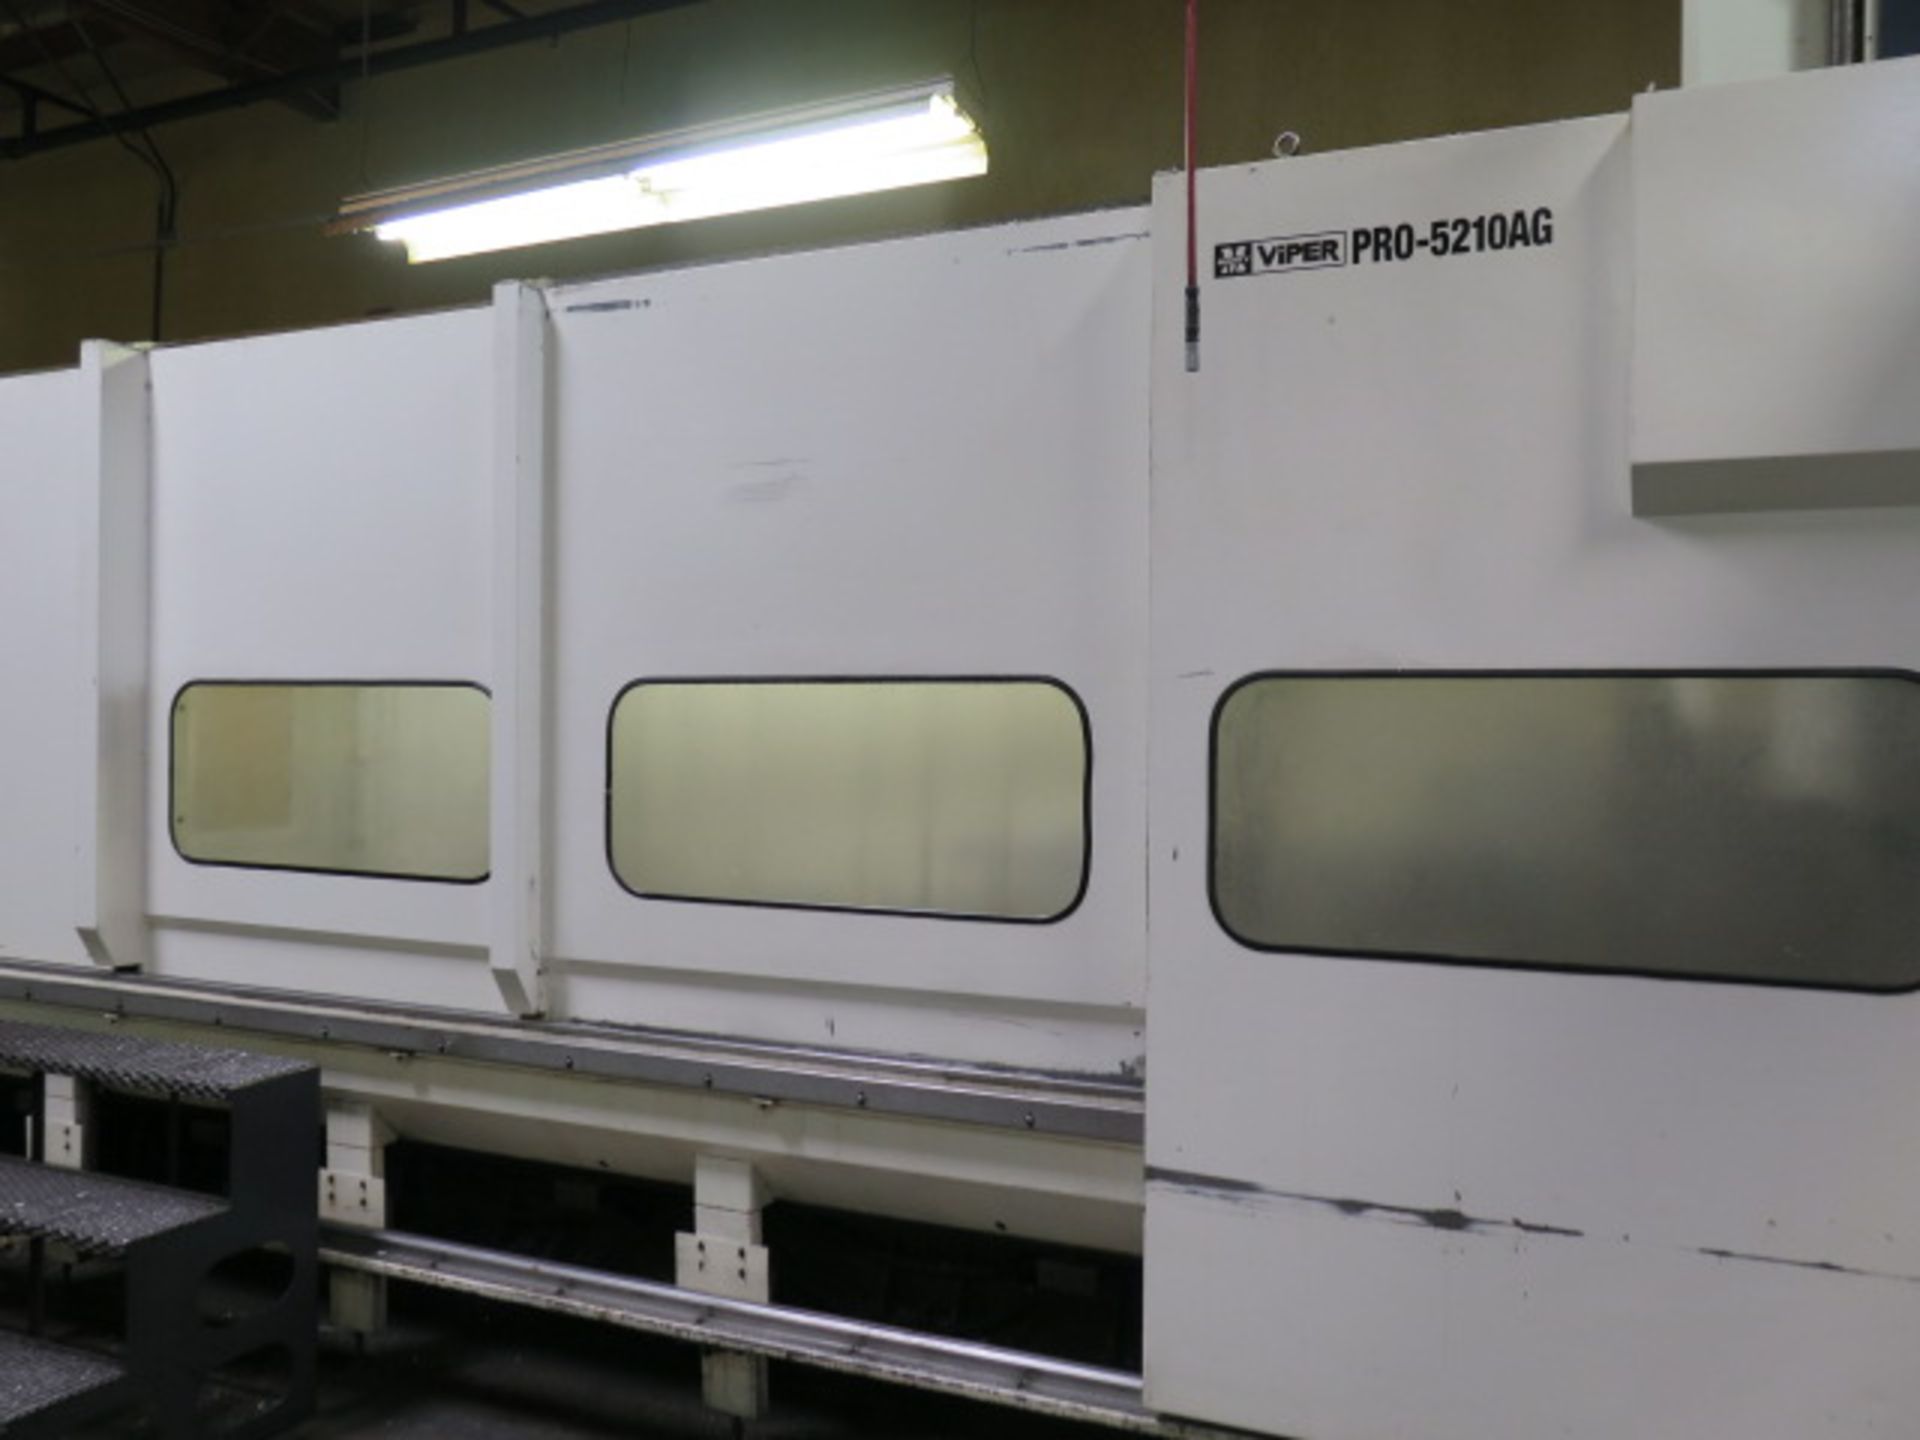 2008 Mighty Viper PRO-5210AG Bridge Style CNC VMC s/n 012169 w/ Fanuc Series 18i-MB, SOLD AS IS - Image 4 of 22